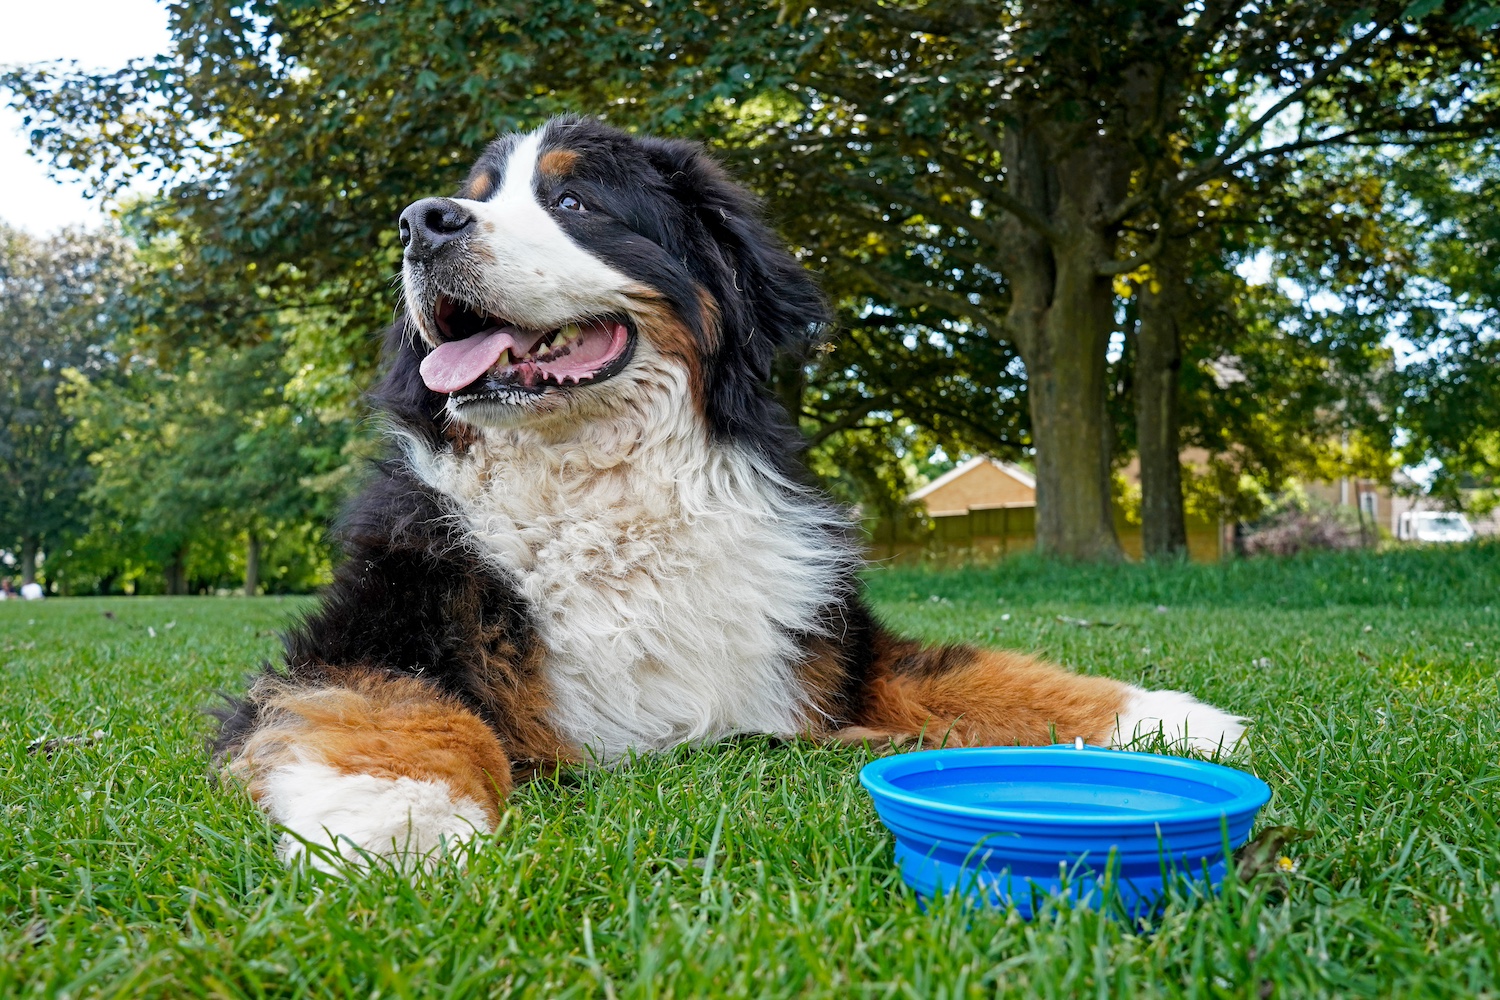 A Bernese mountain dog panting outdoors near a bowl of water